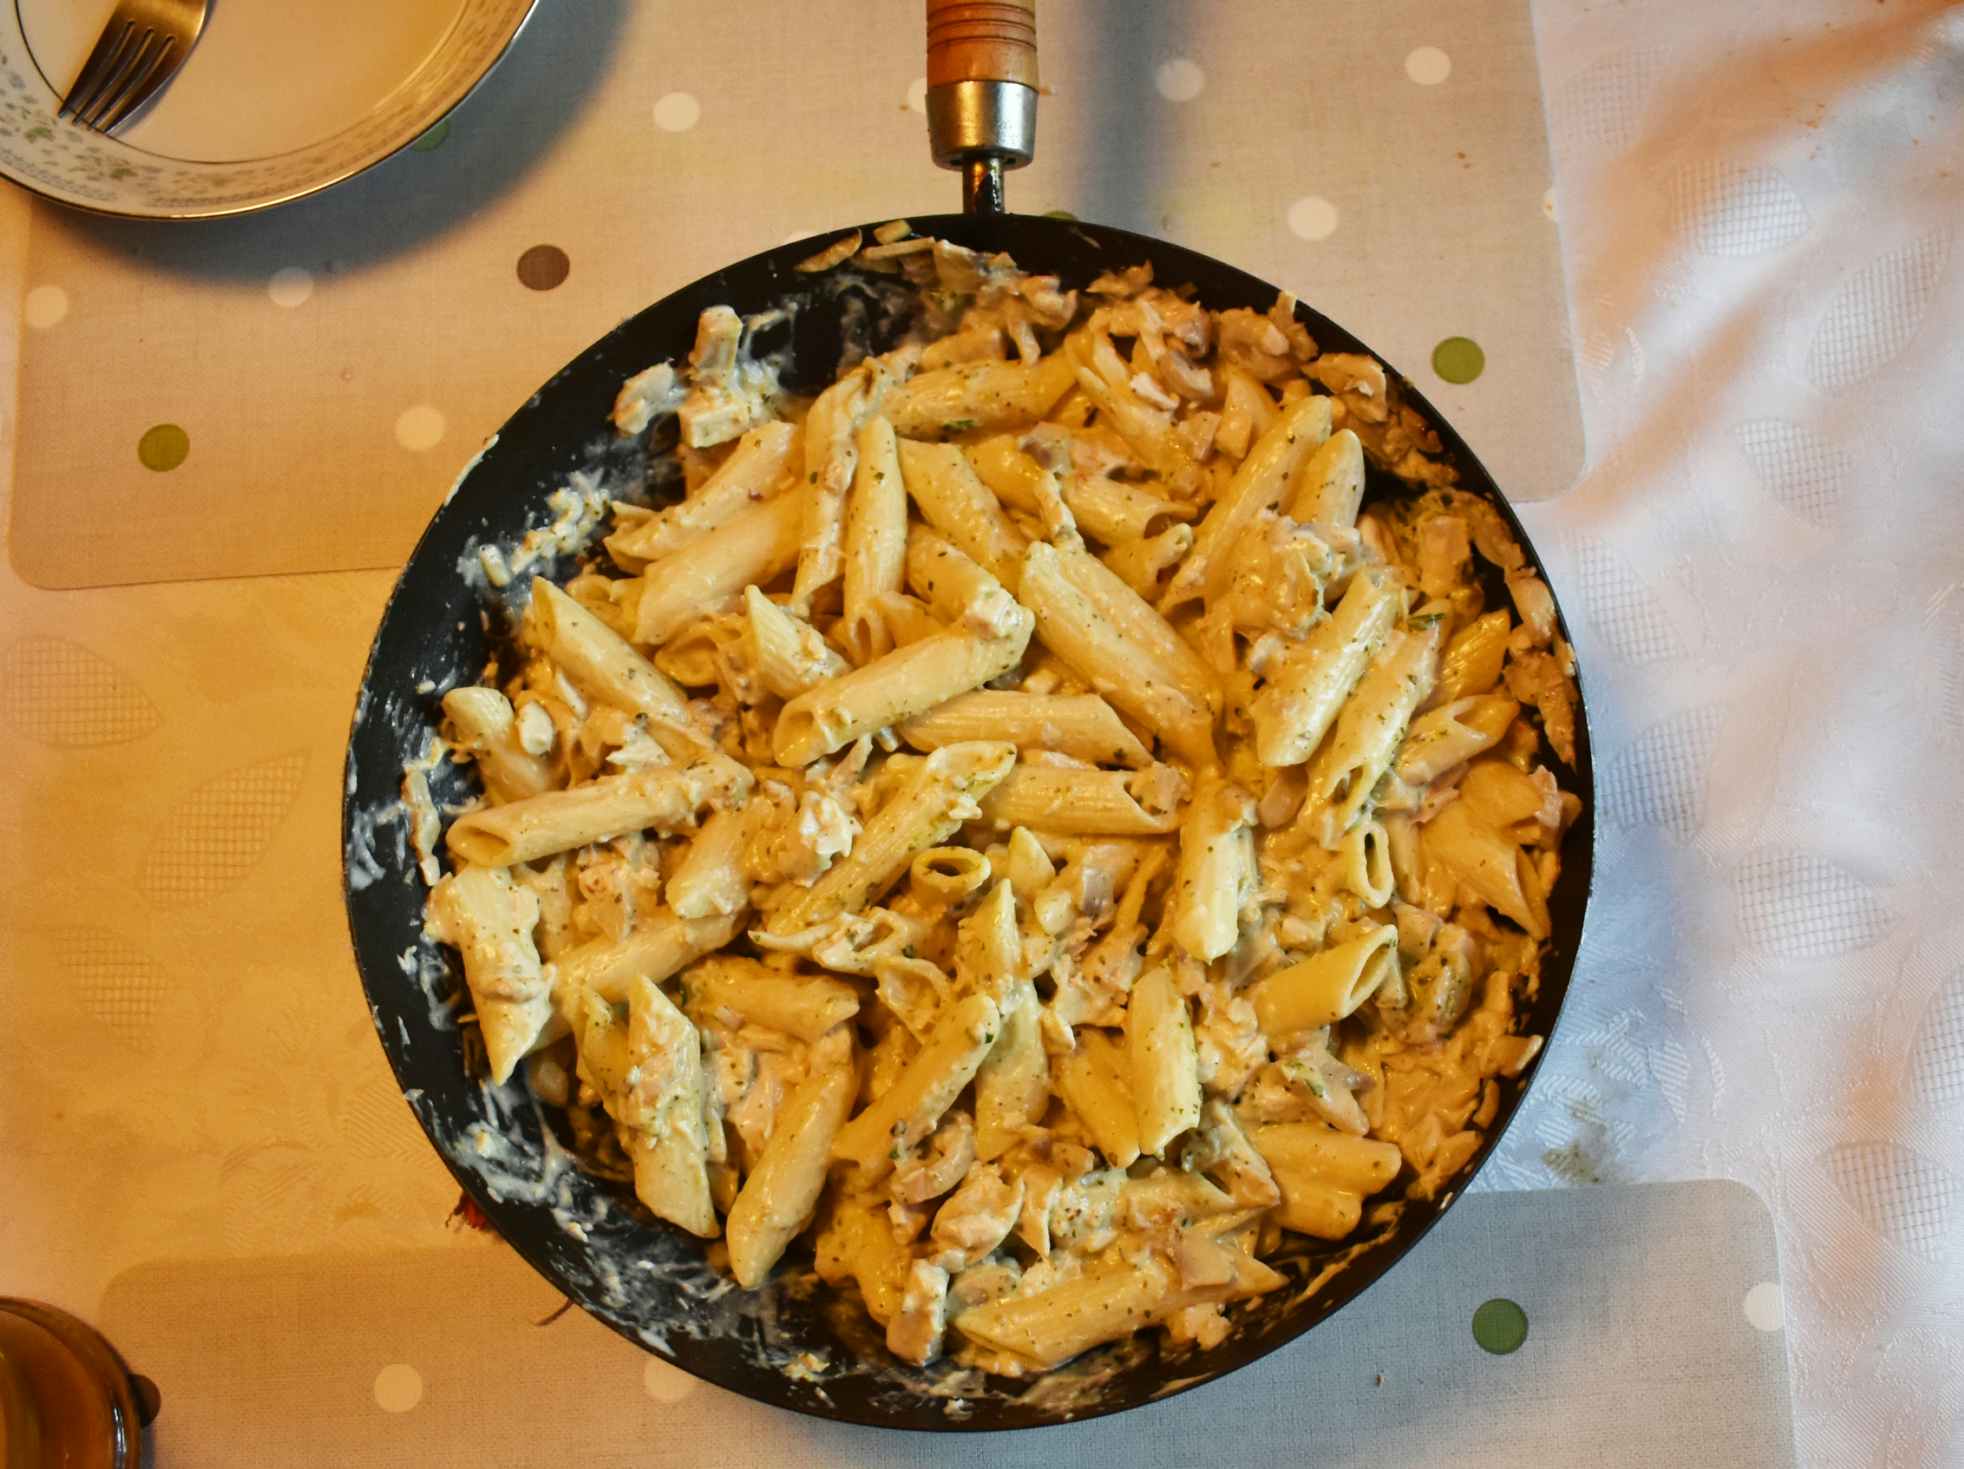 cheap meals that go a long way - Pasta in a pan on the dinner table